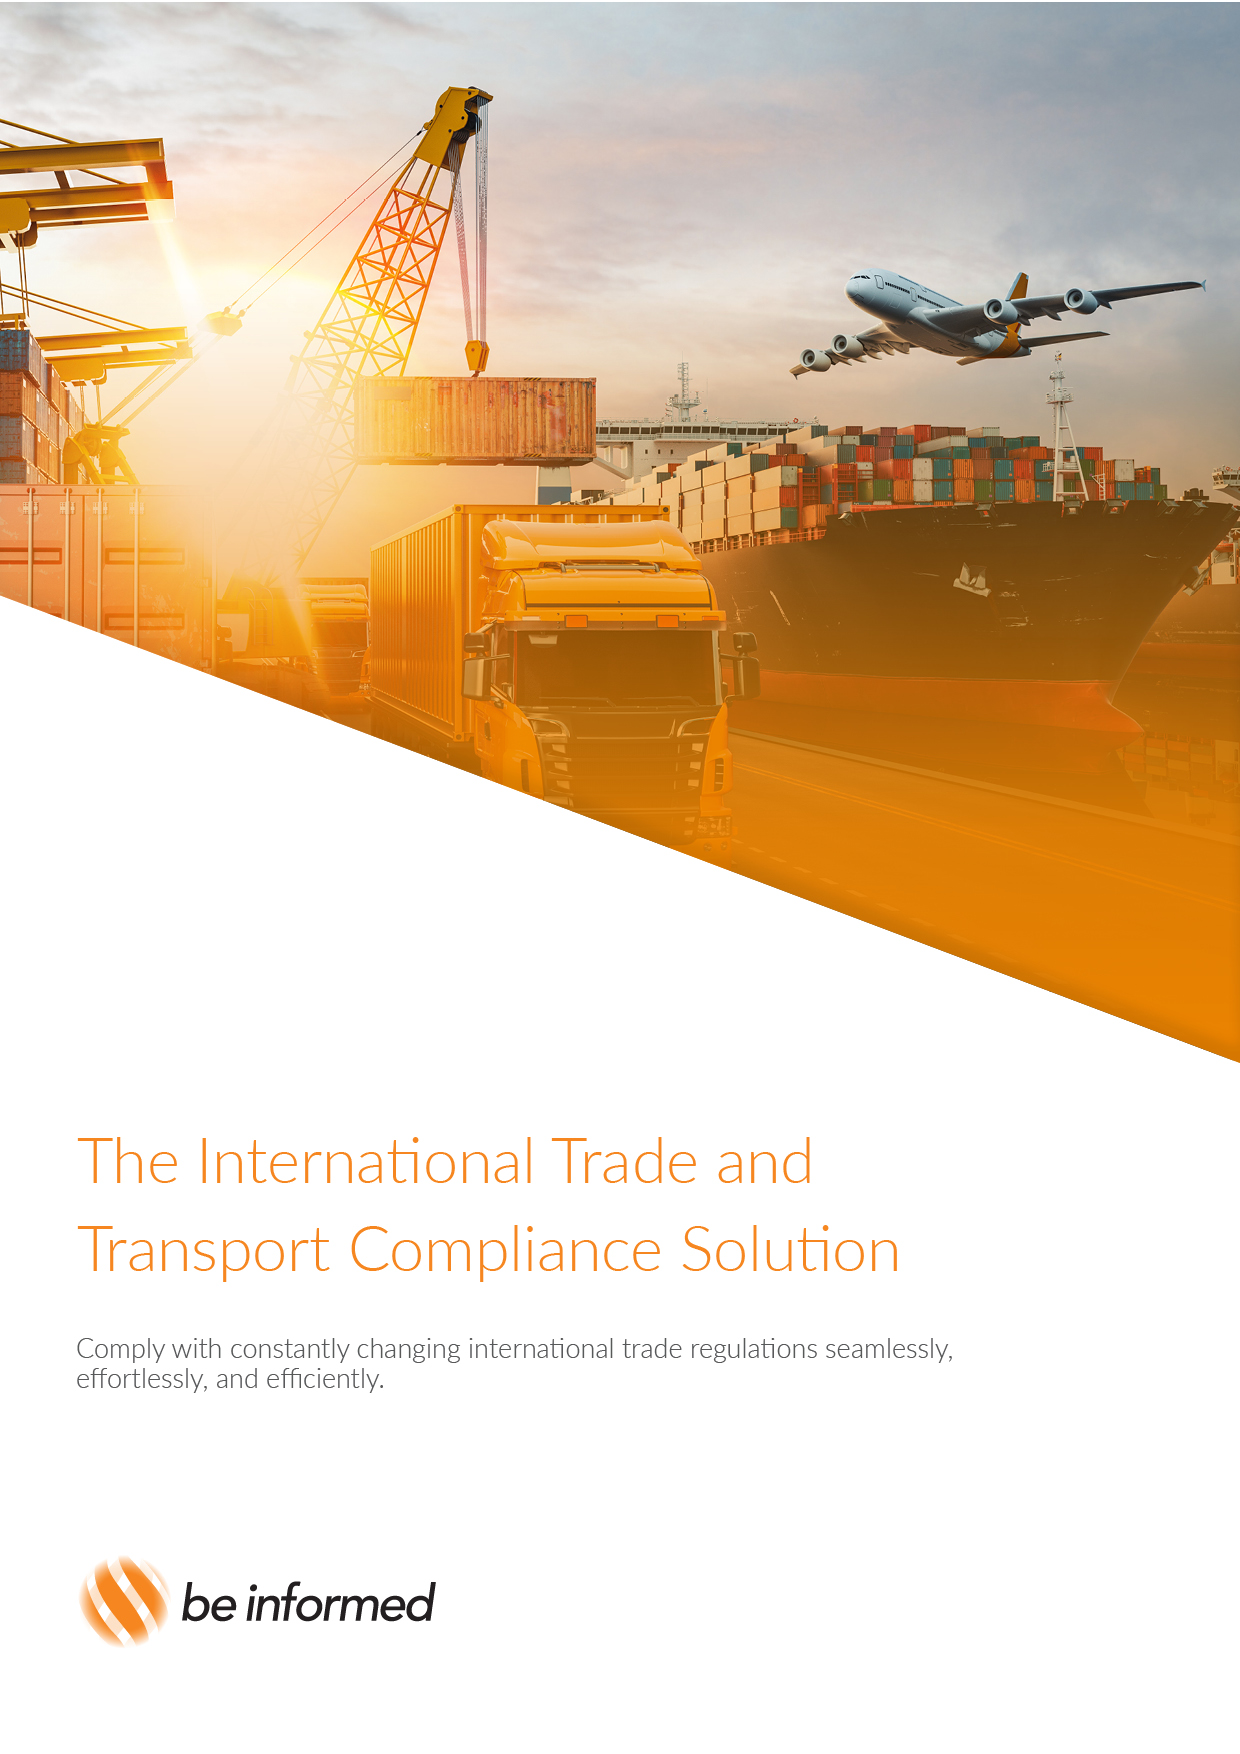 International Trade and Transport Compliance whitepaper